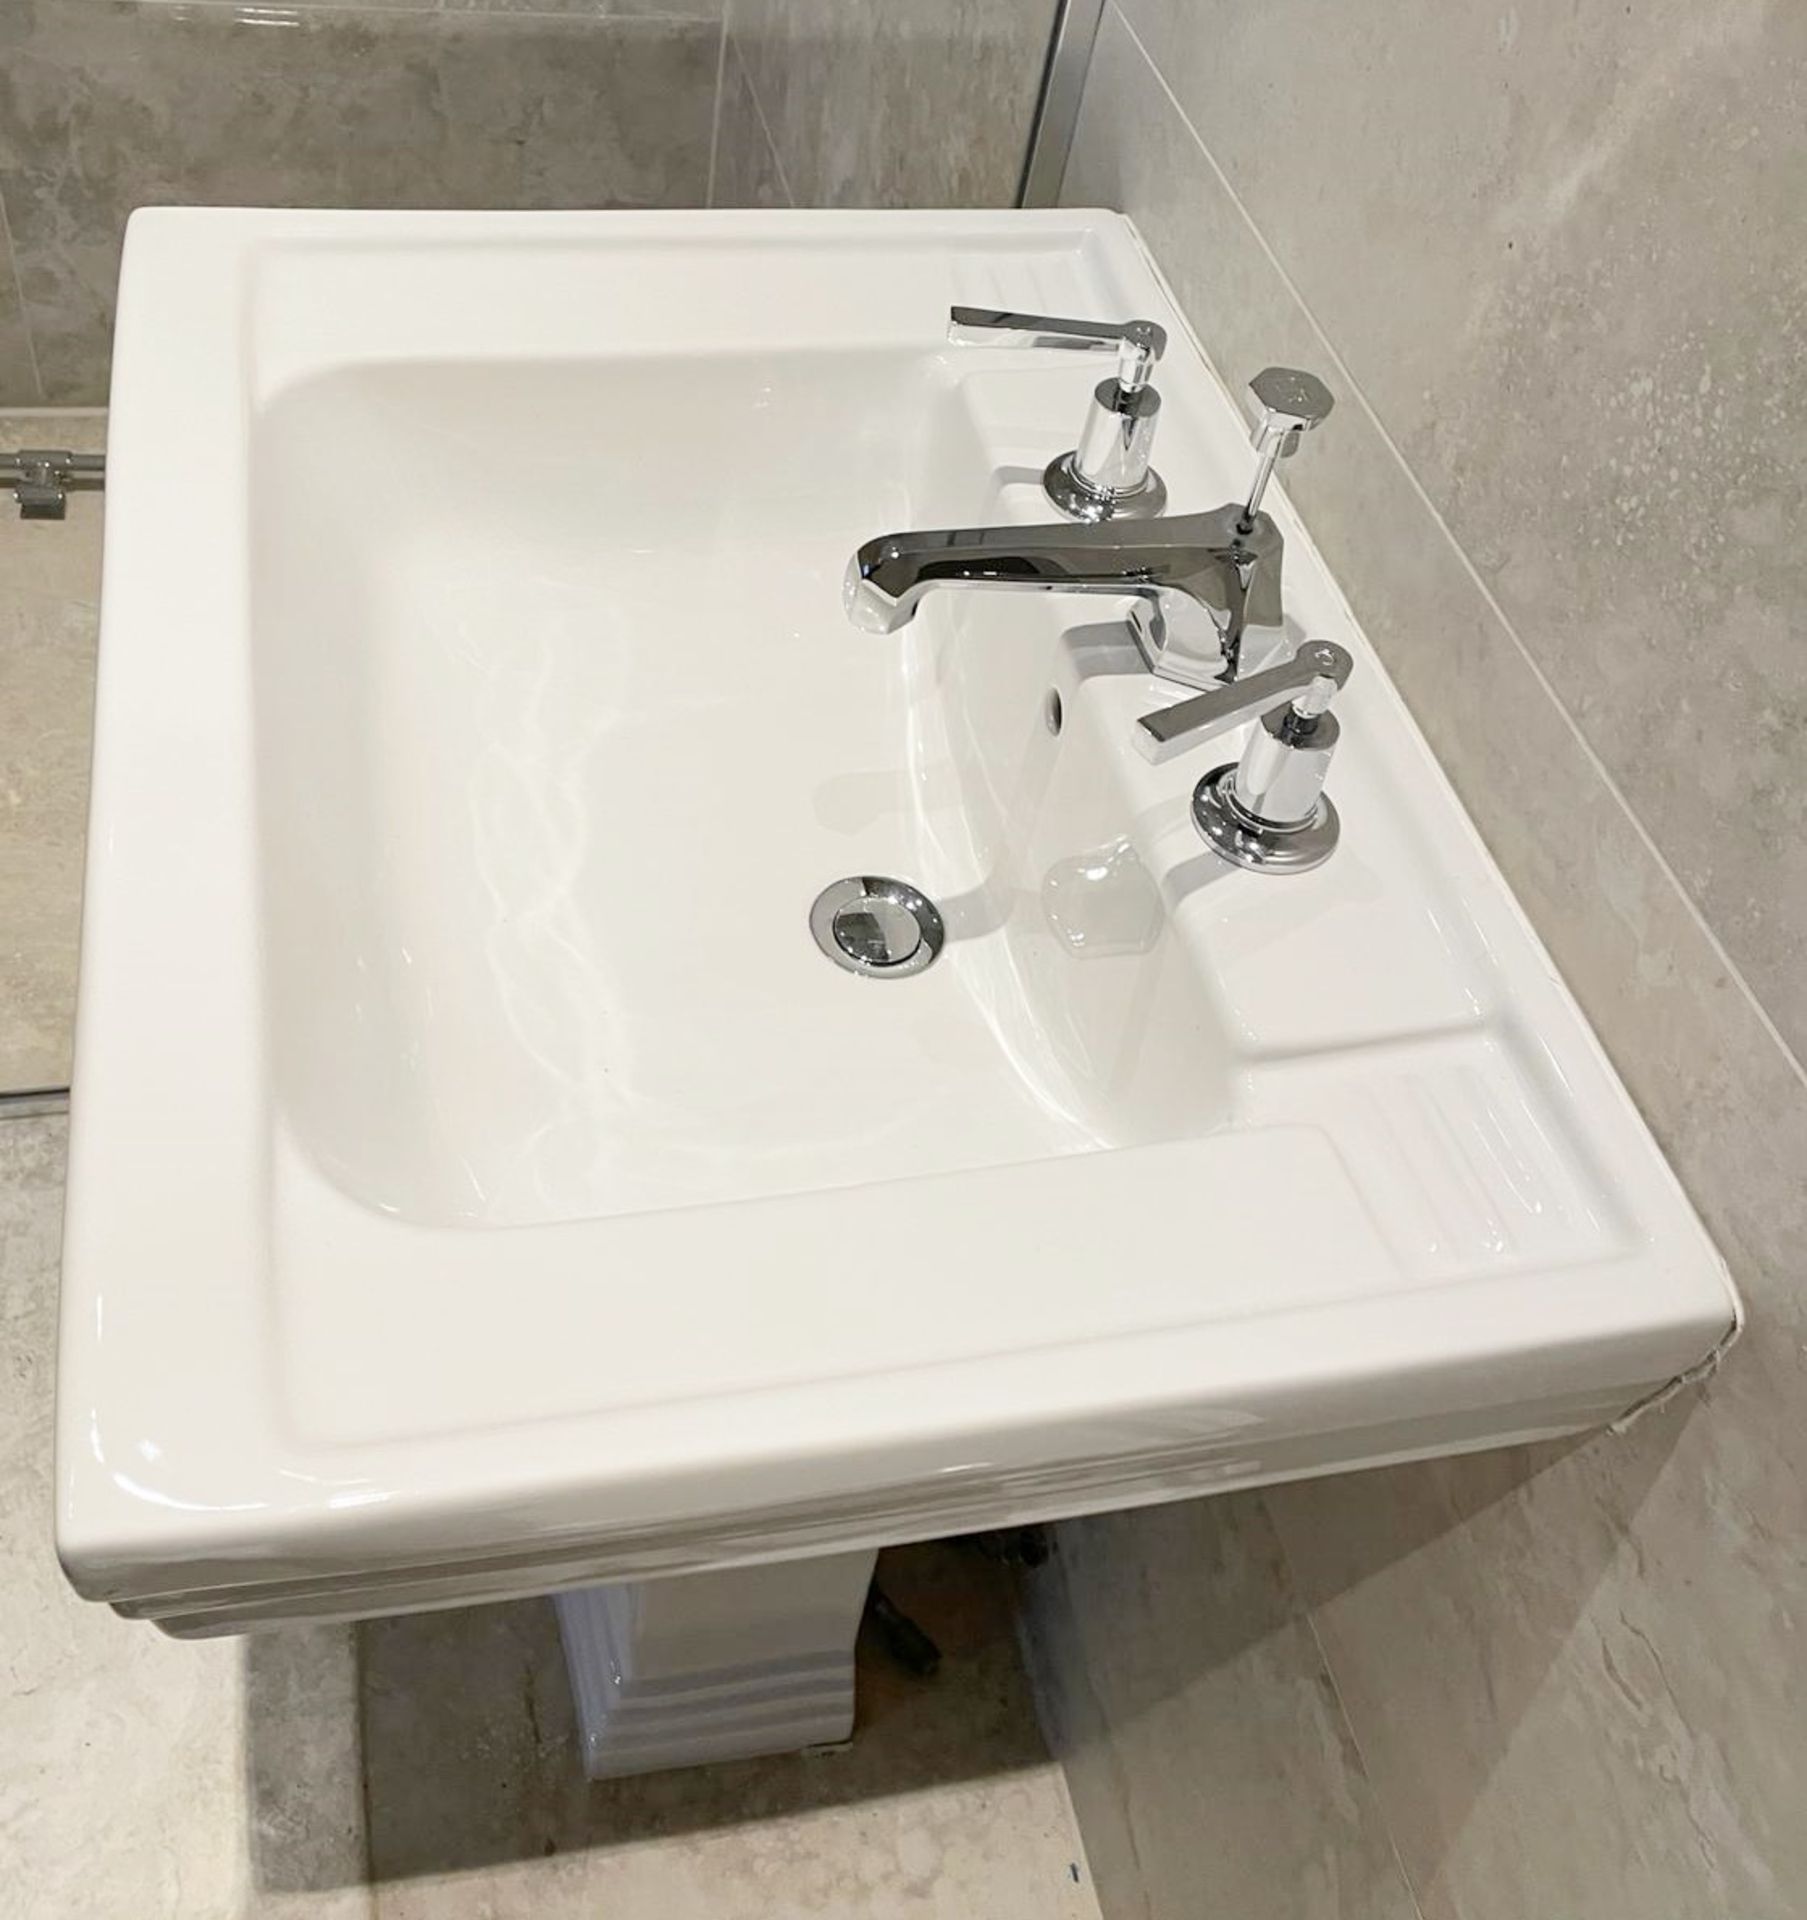 1 x Traditional Style Ceramic Sink and Pedestal - Ref: FBD/R-LNG - CL896 - NO VAT ON THE HAMMER - - Image 2 of 7